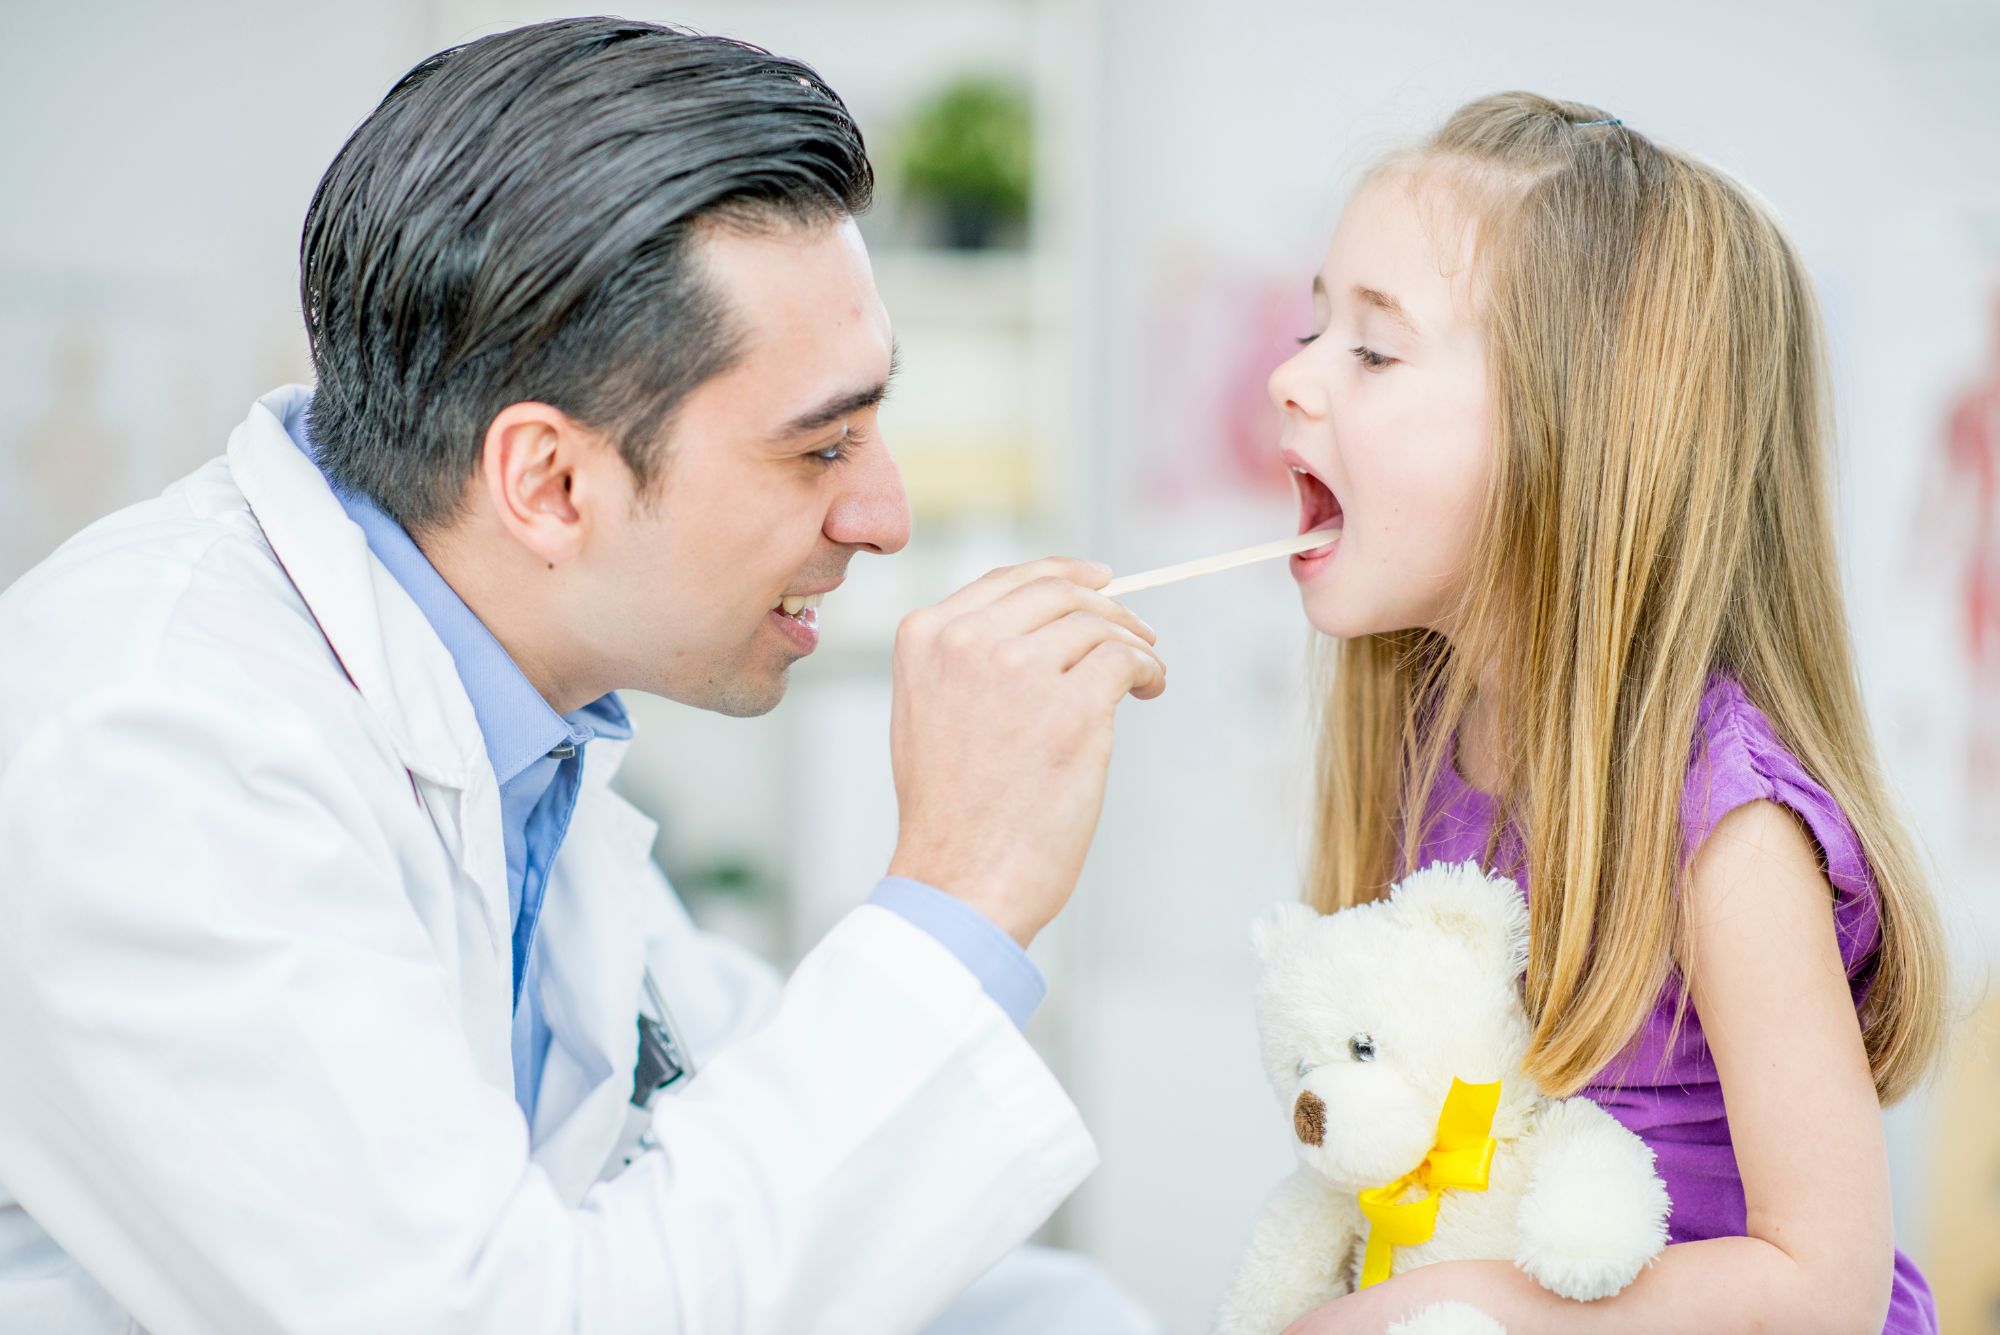 A little girl holding a stuffed bear gets her throat looked at by a pediatric otolaryngologist.